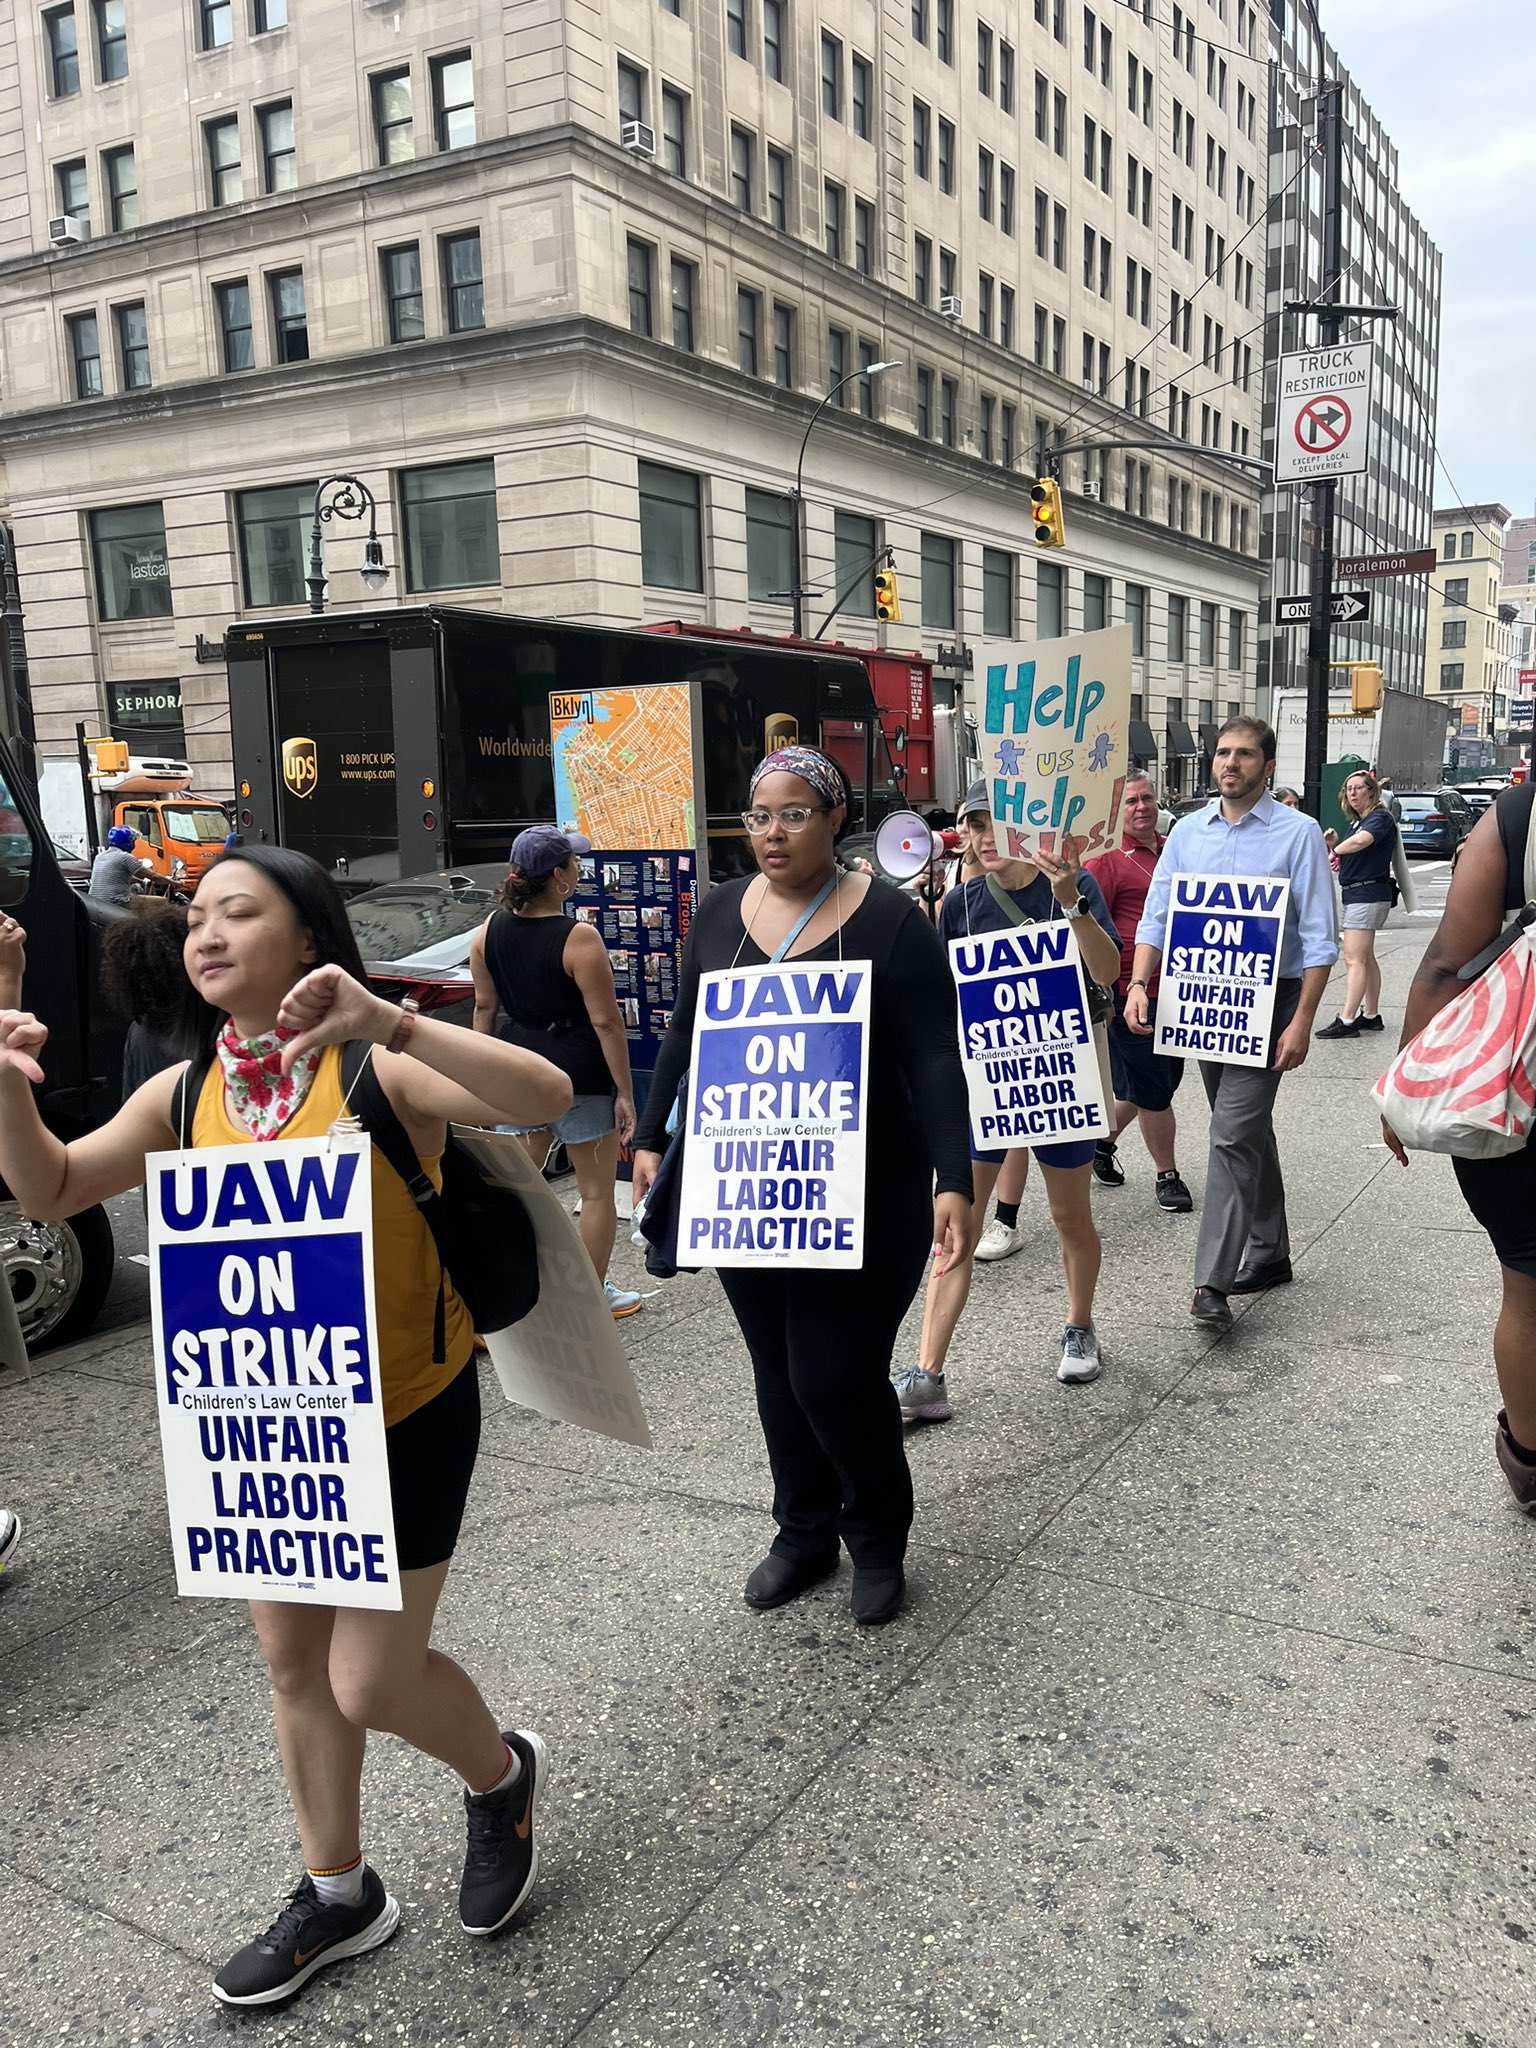 Children's Law Center workers (UAW) strike so they can better help children.